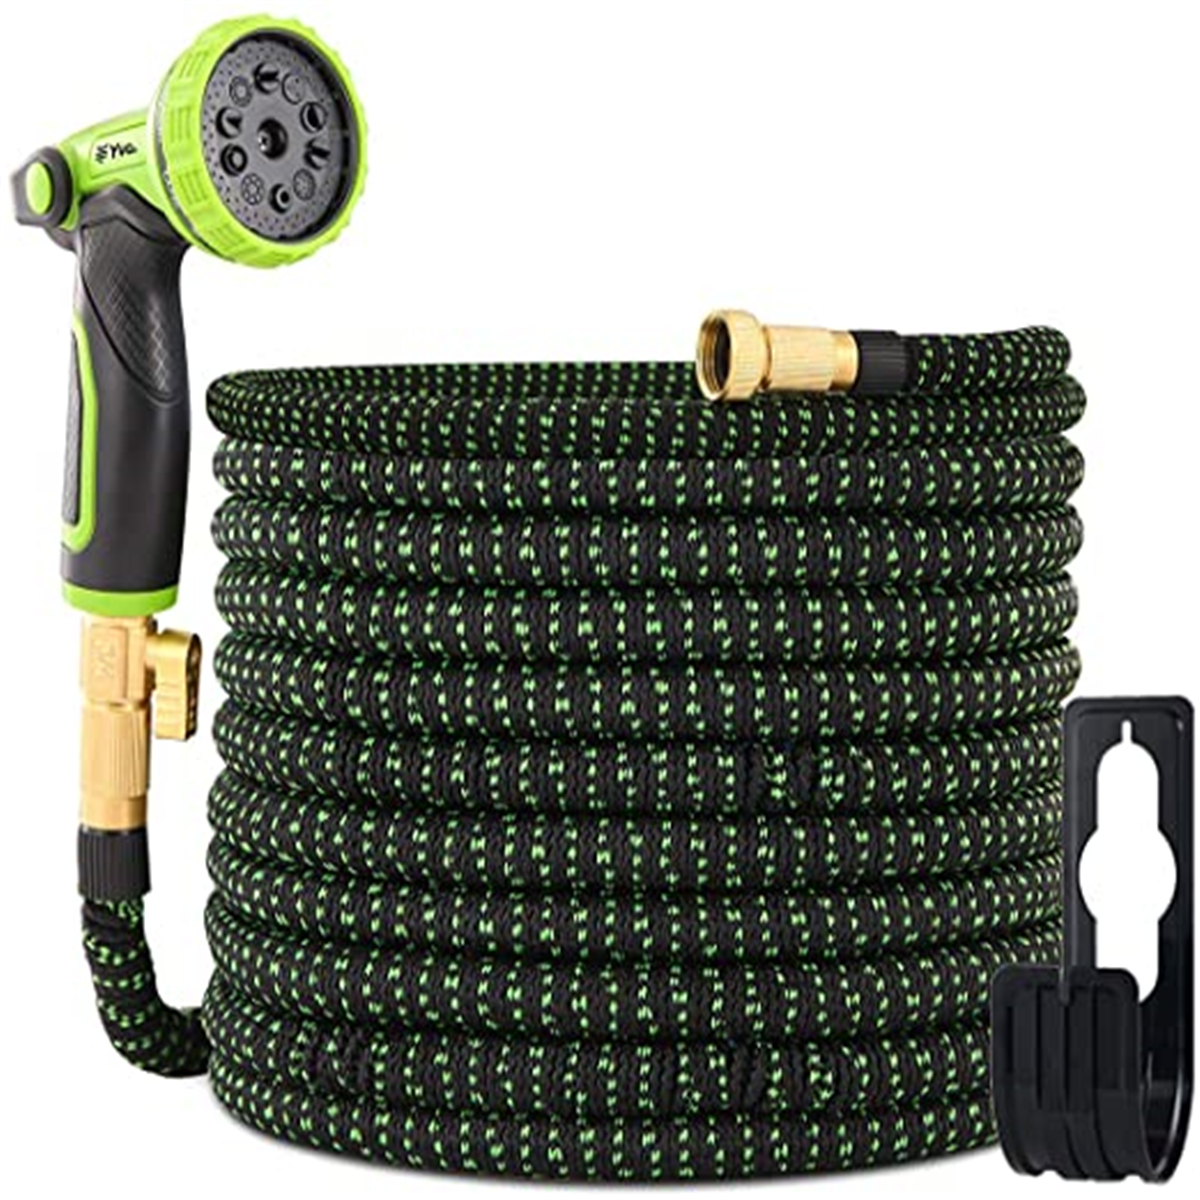 Expandable-Garden-Hose-Heavy-Duty-Flexible-Hose-Double-Latex-Core-With-9-Functions-High-Pressure-Noz-1763338